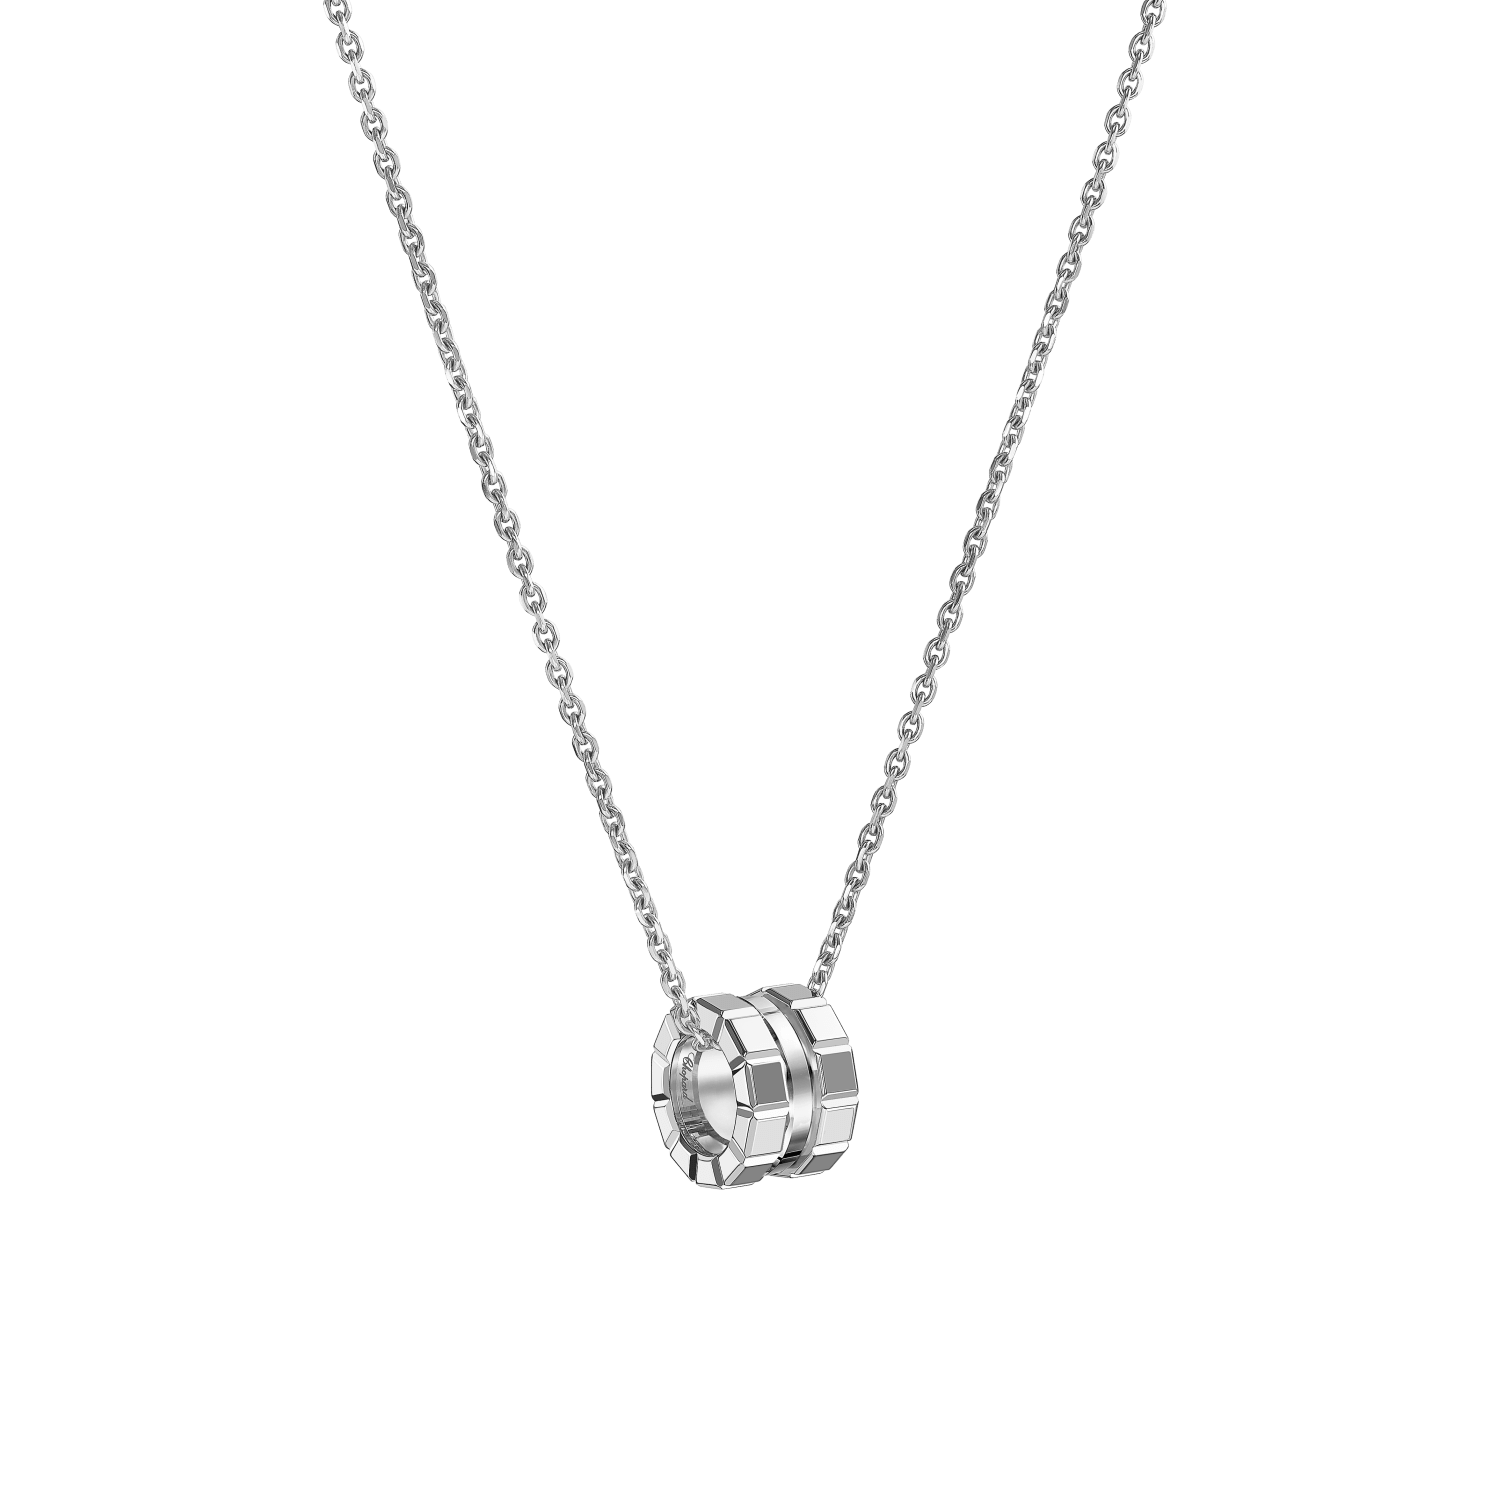 Chopard 18kt white gold Ice Cube Pure necklace - Fairmined White Gold